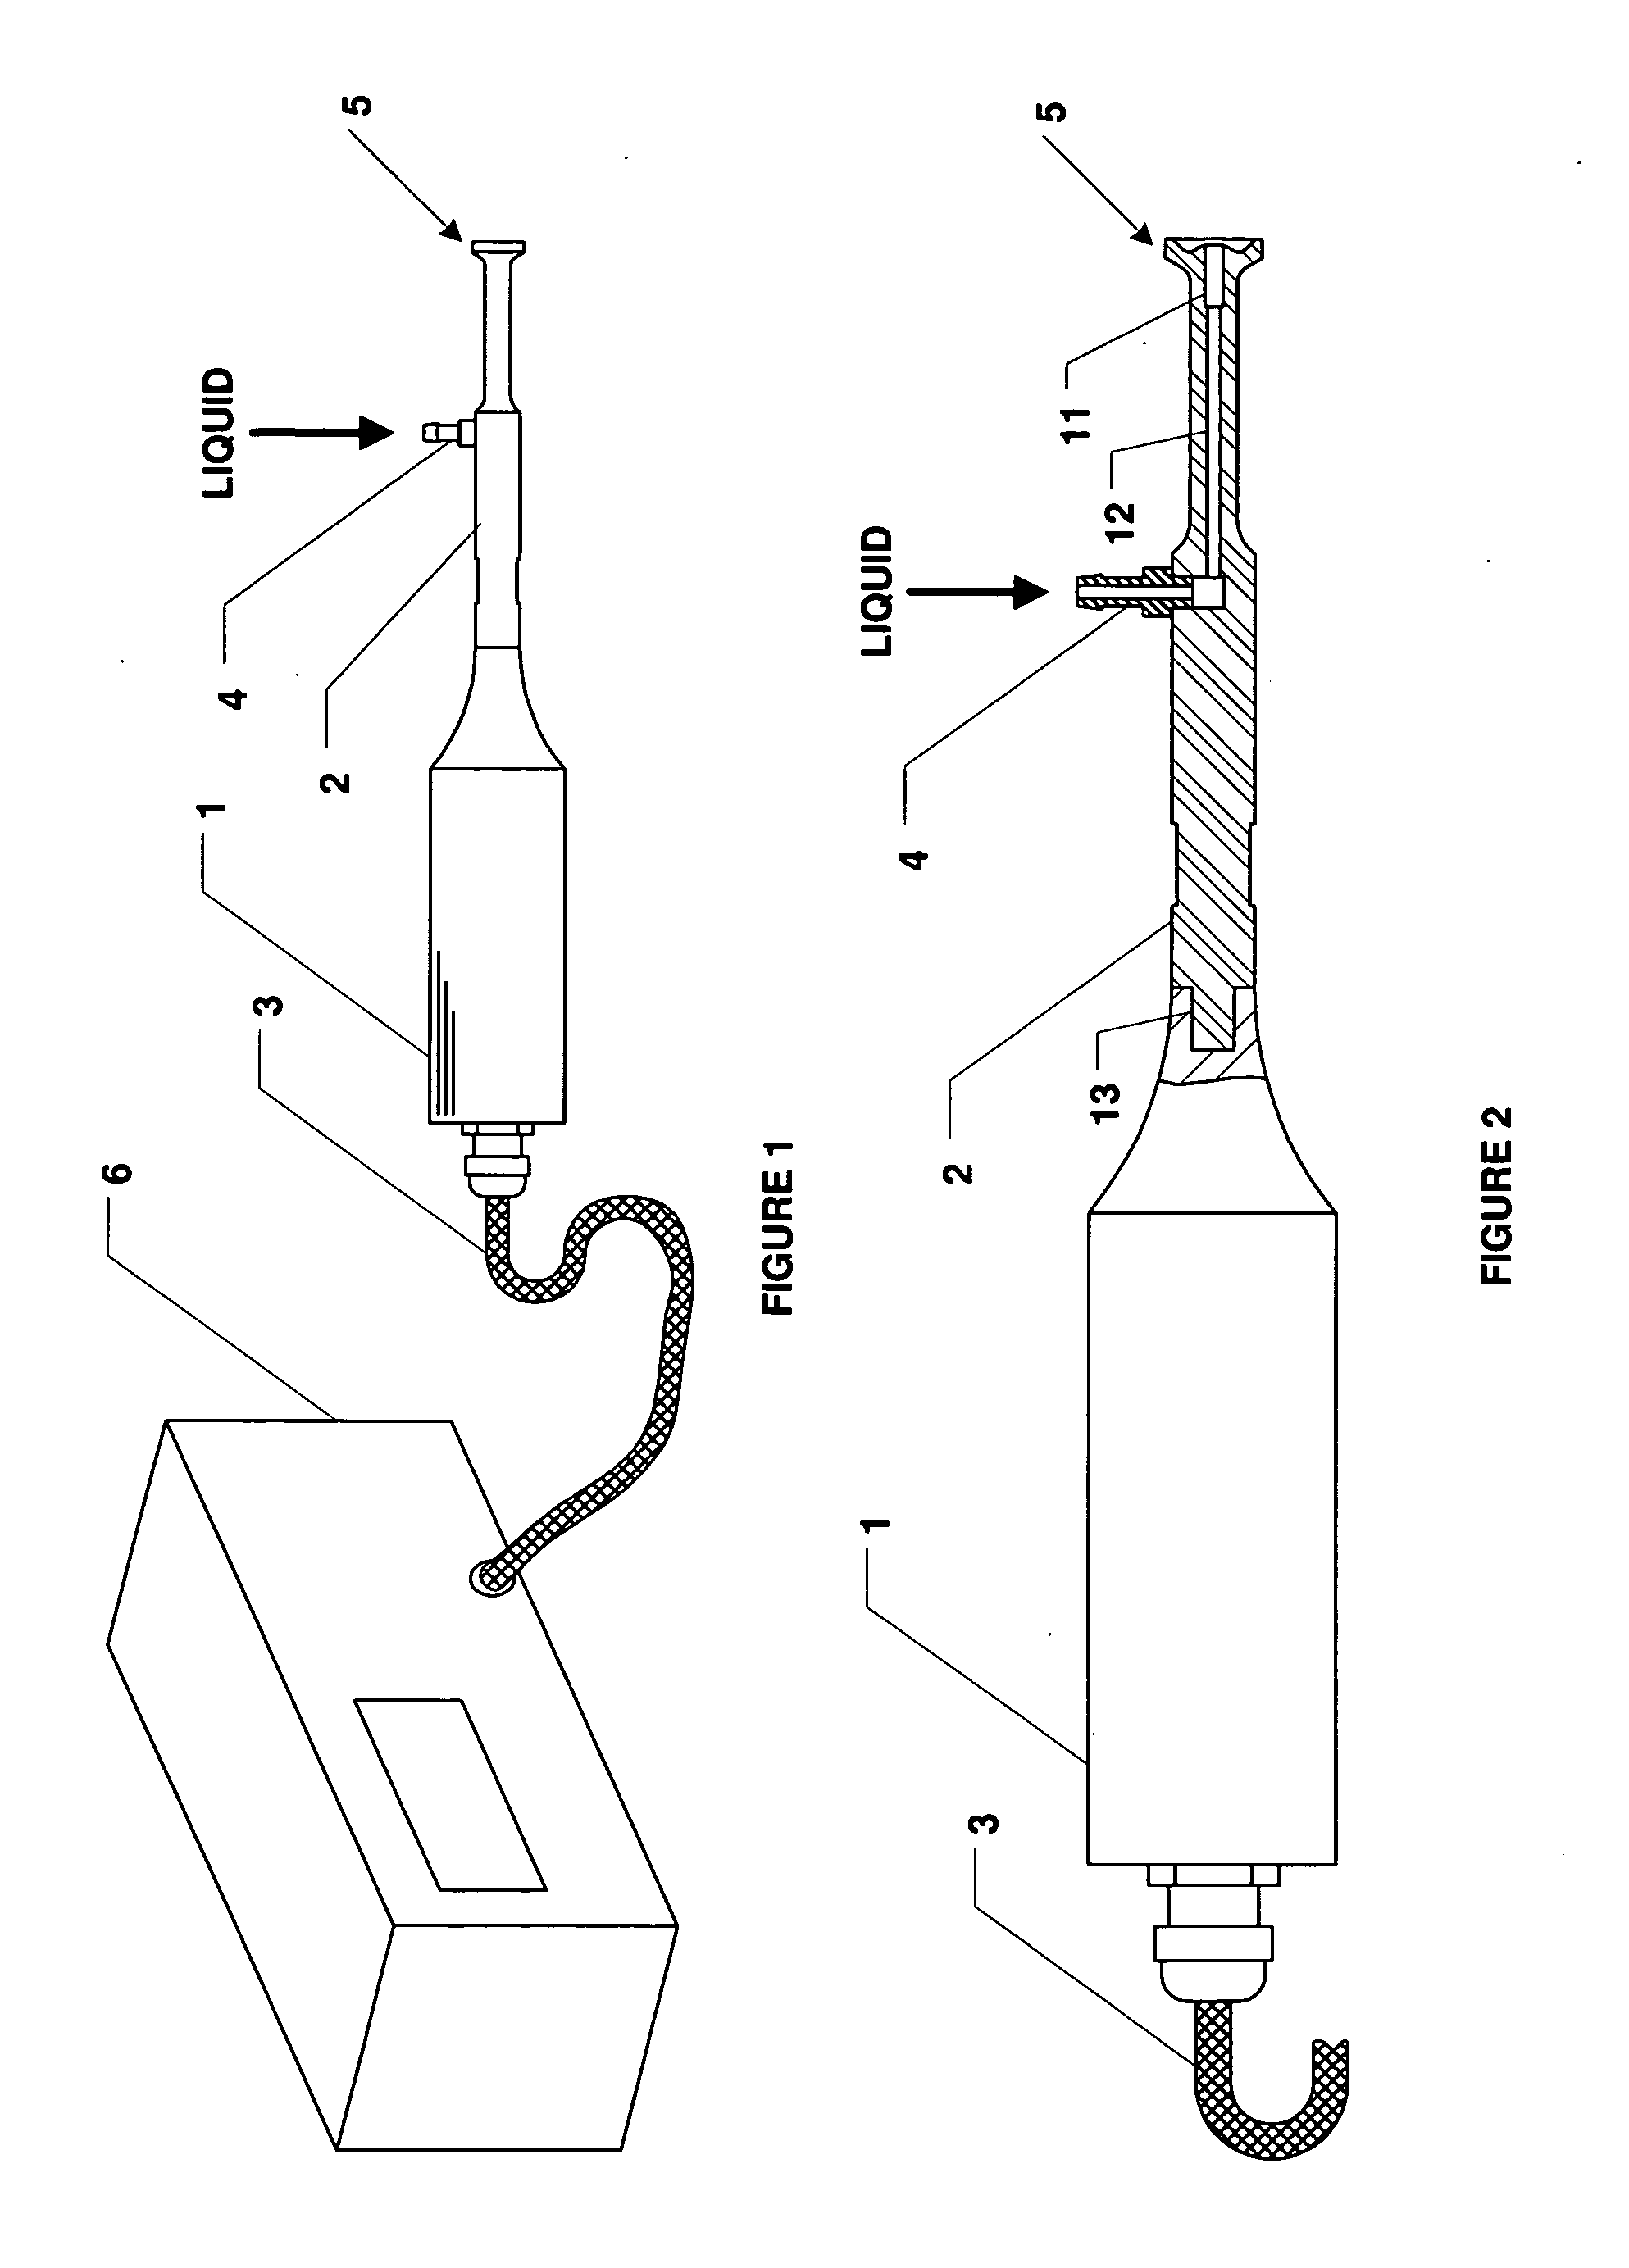 Apparatus and methods for the treatment of avian influenza with ultrasound